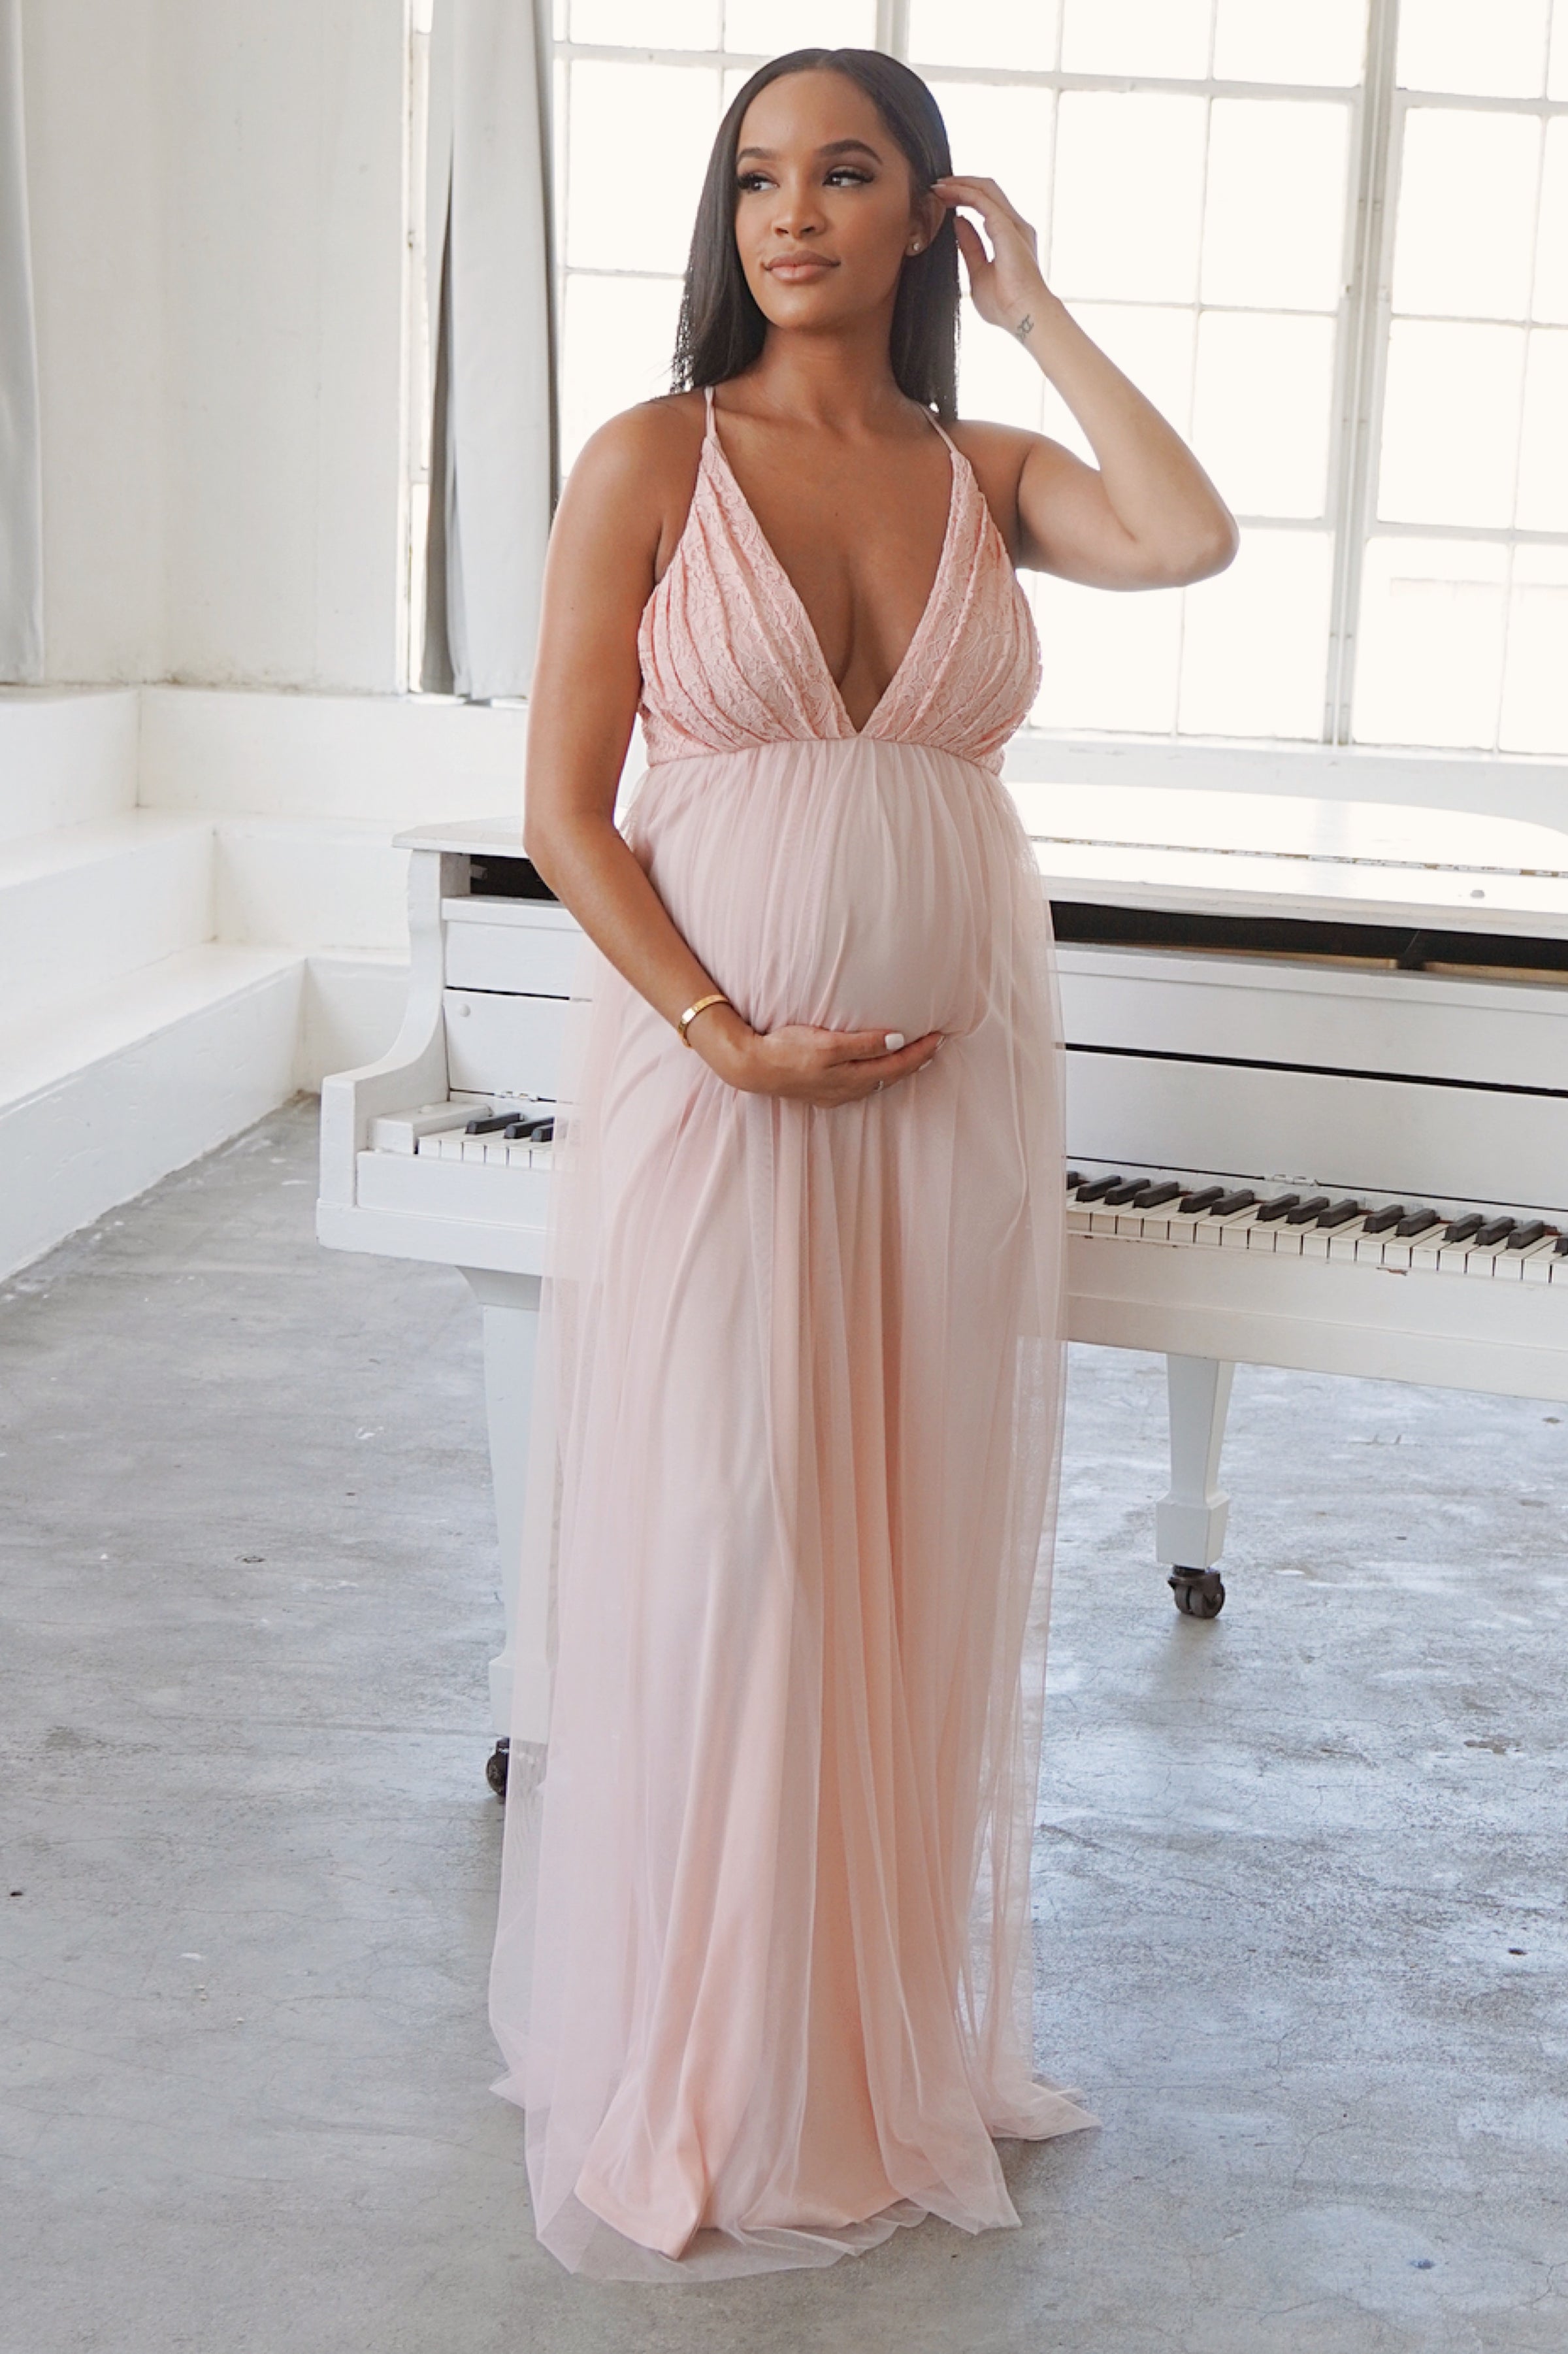 Blue Spaghetti Strap Baby Shower Gown, Maternity Lace Dress, Tulle Skirt –  Chic Bump Club